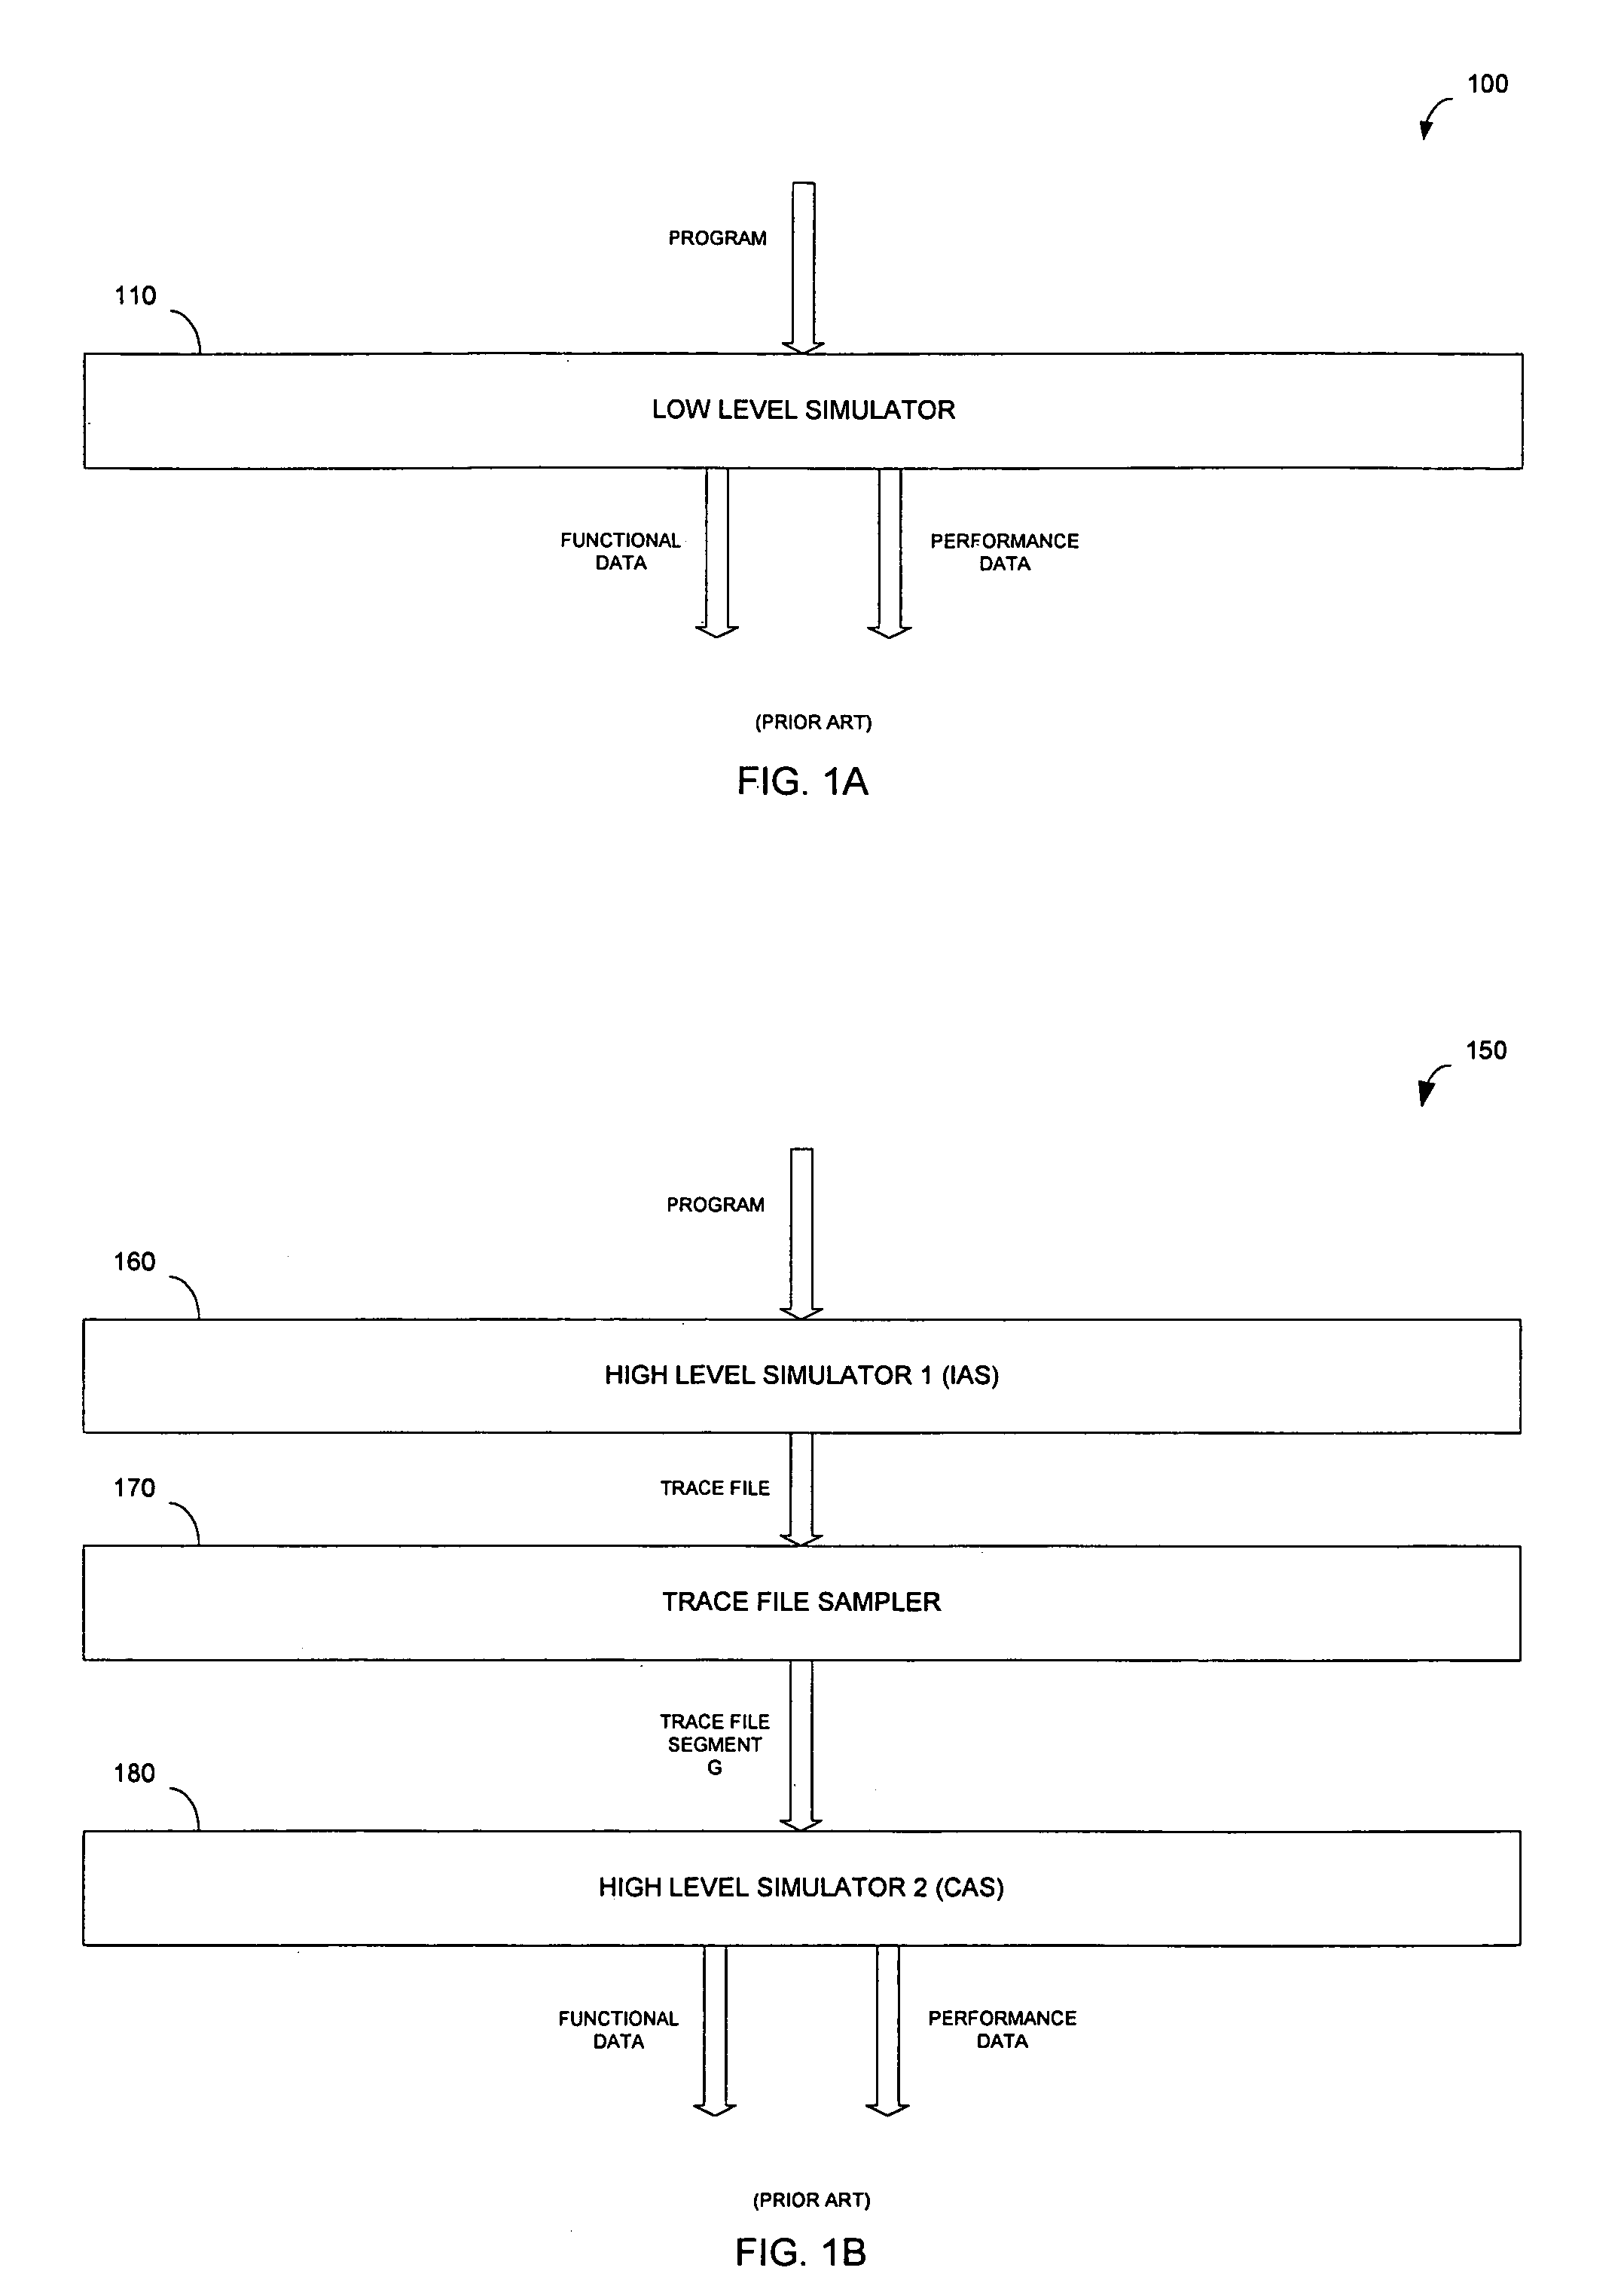 System and method for validating processor performance and functionality